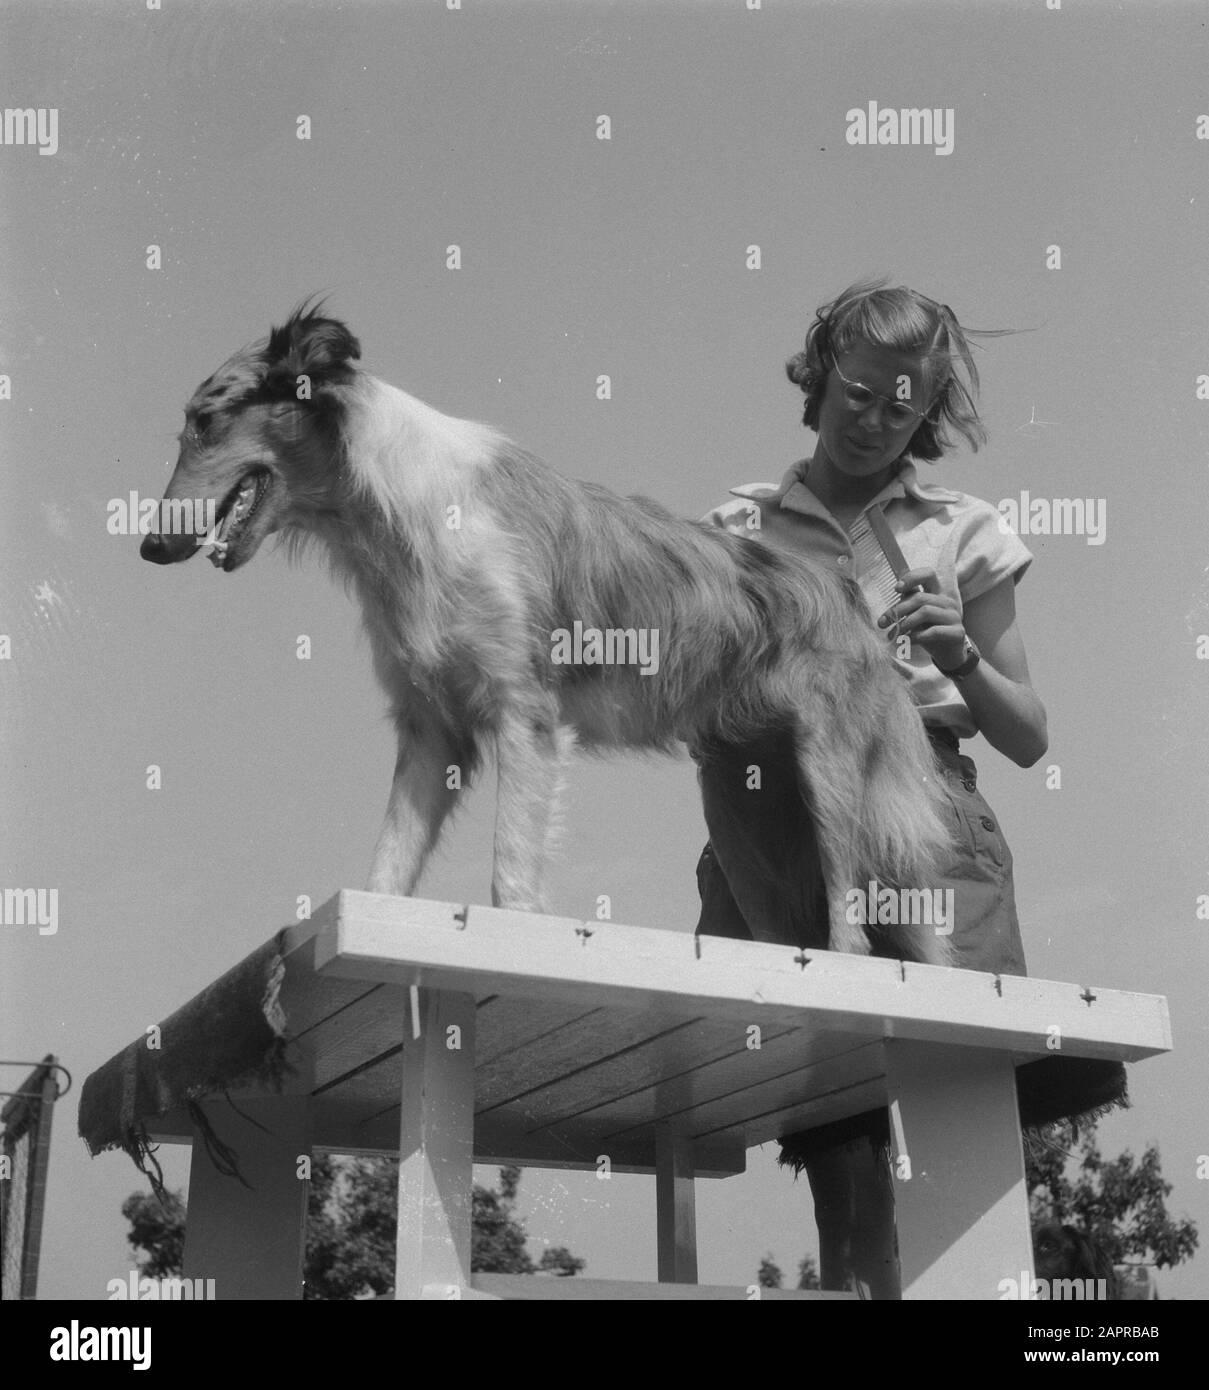 Dog pension Duivendrecht Date: May 26, 1949 Location: Pigeon law Keywords: Dog Pensionen Stock Photo